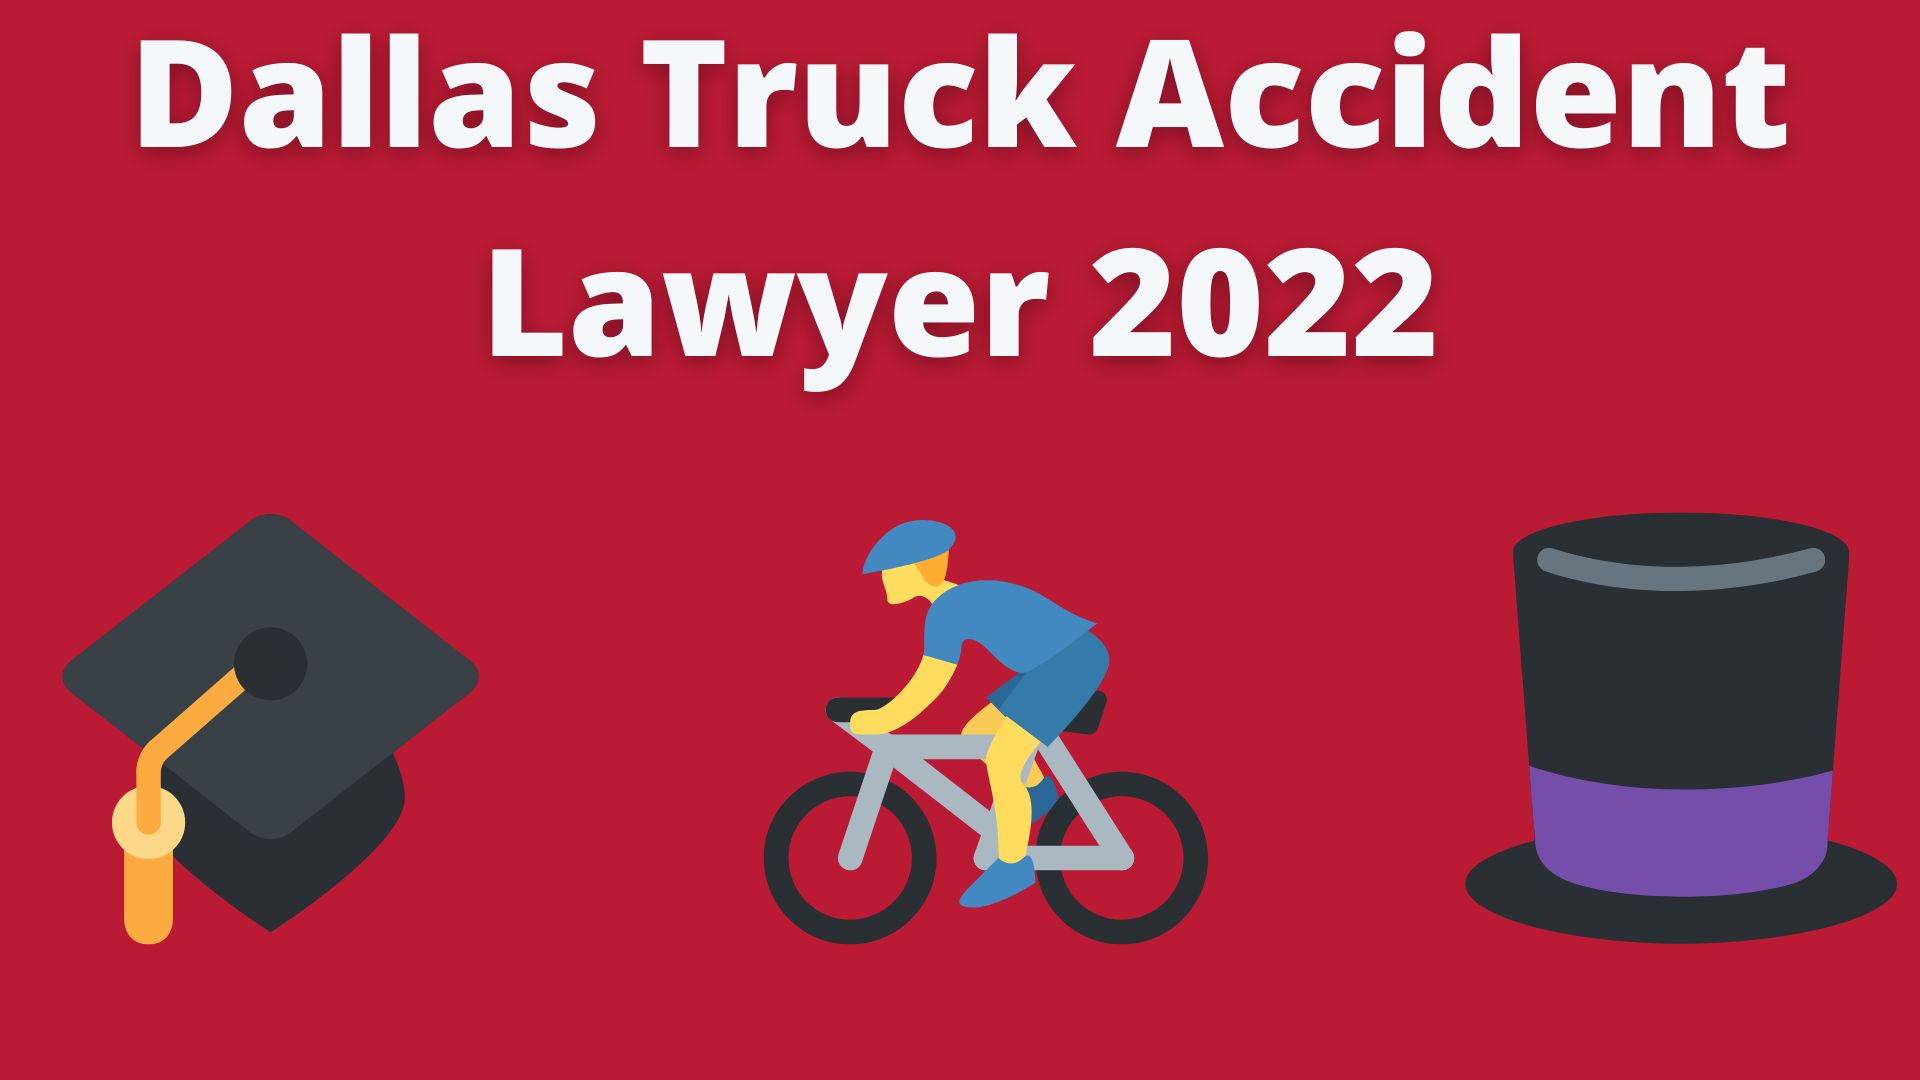 Dallas Truck Accident Lawyer 2022